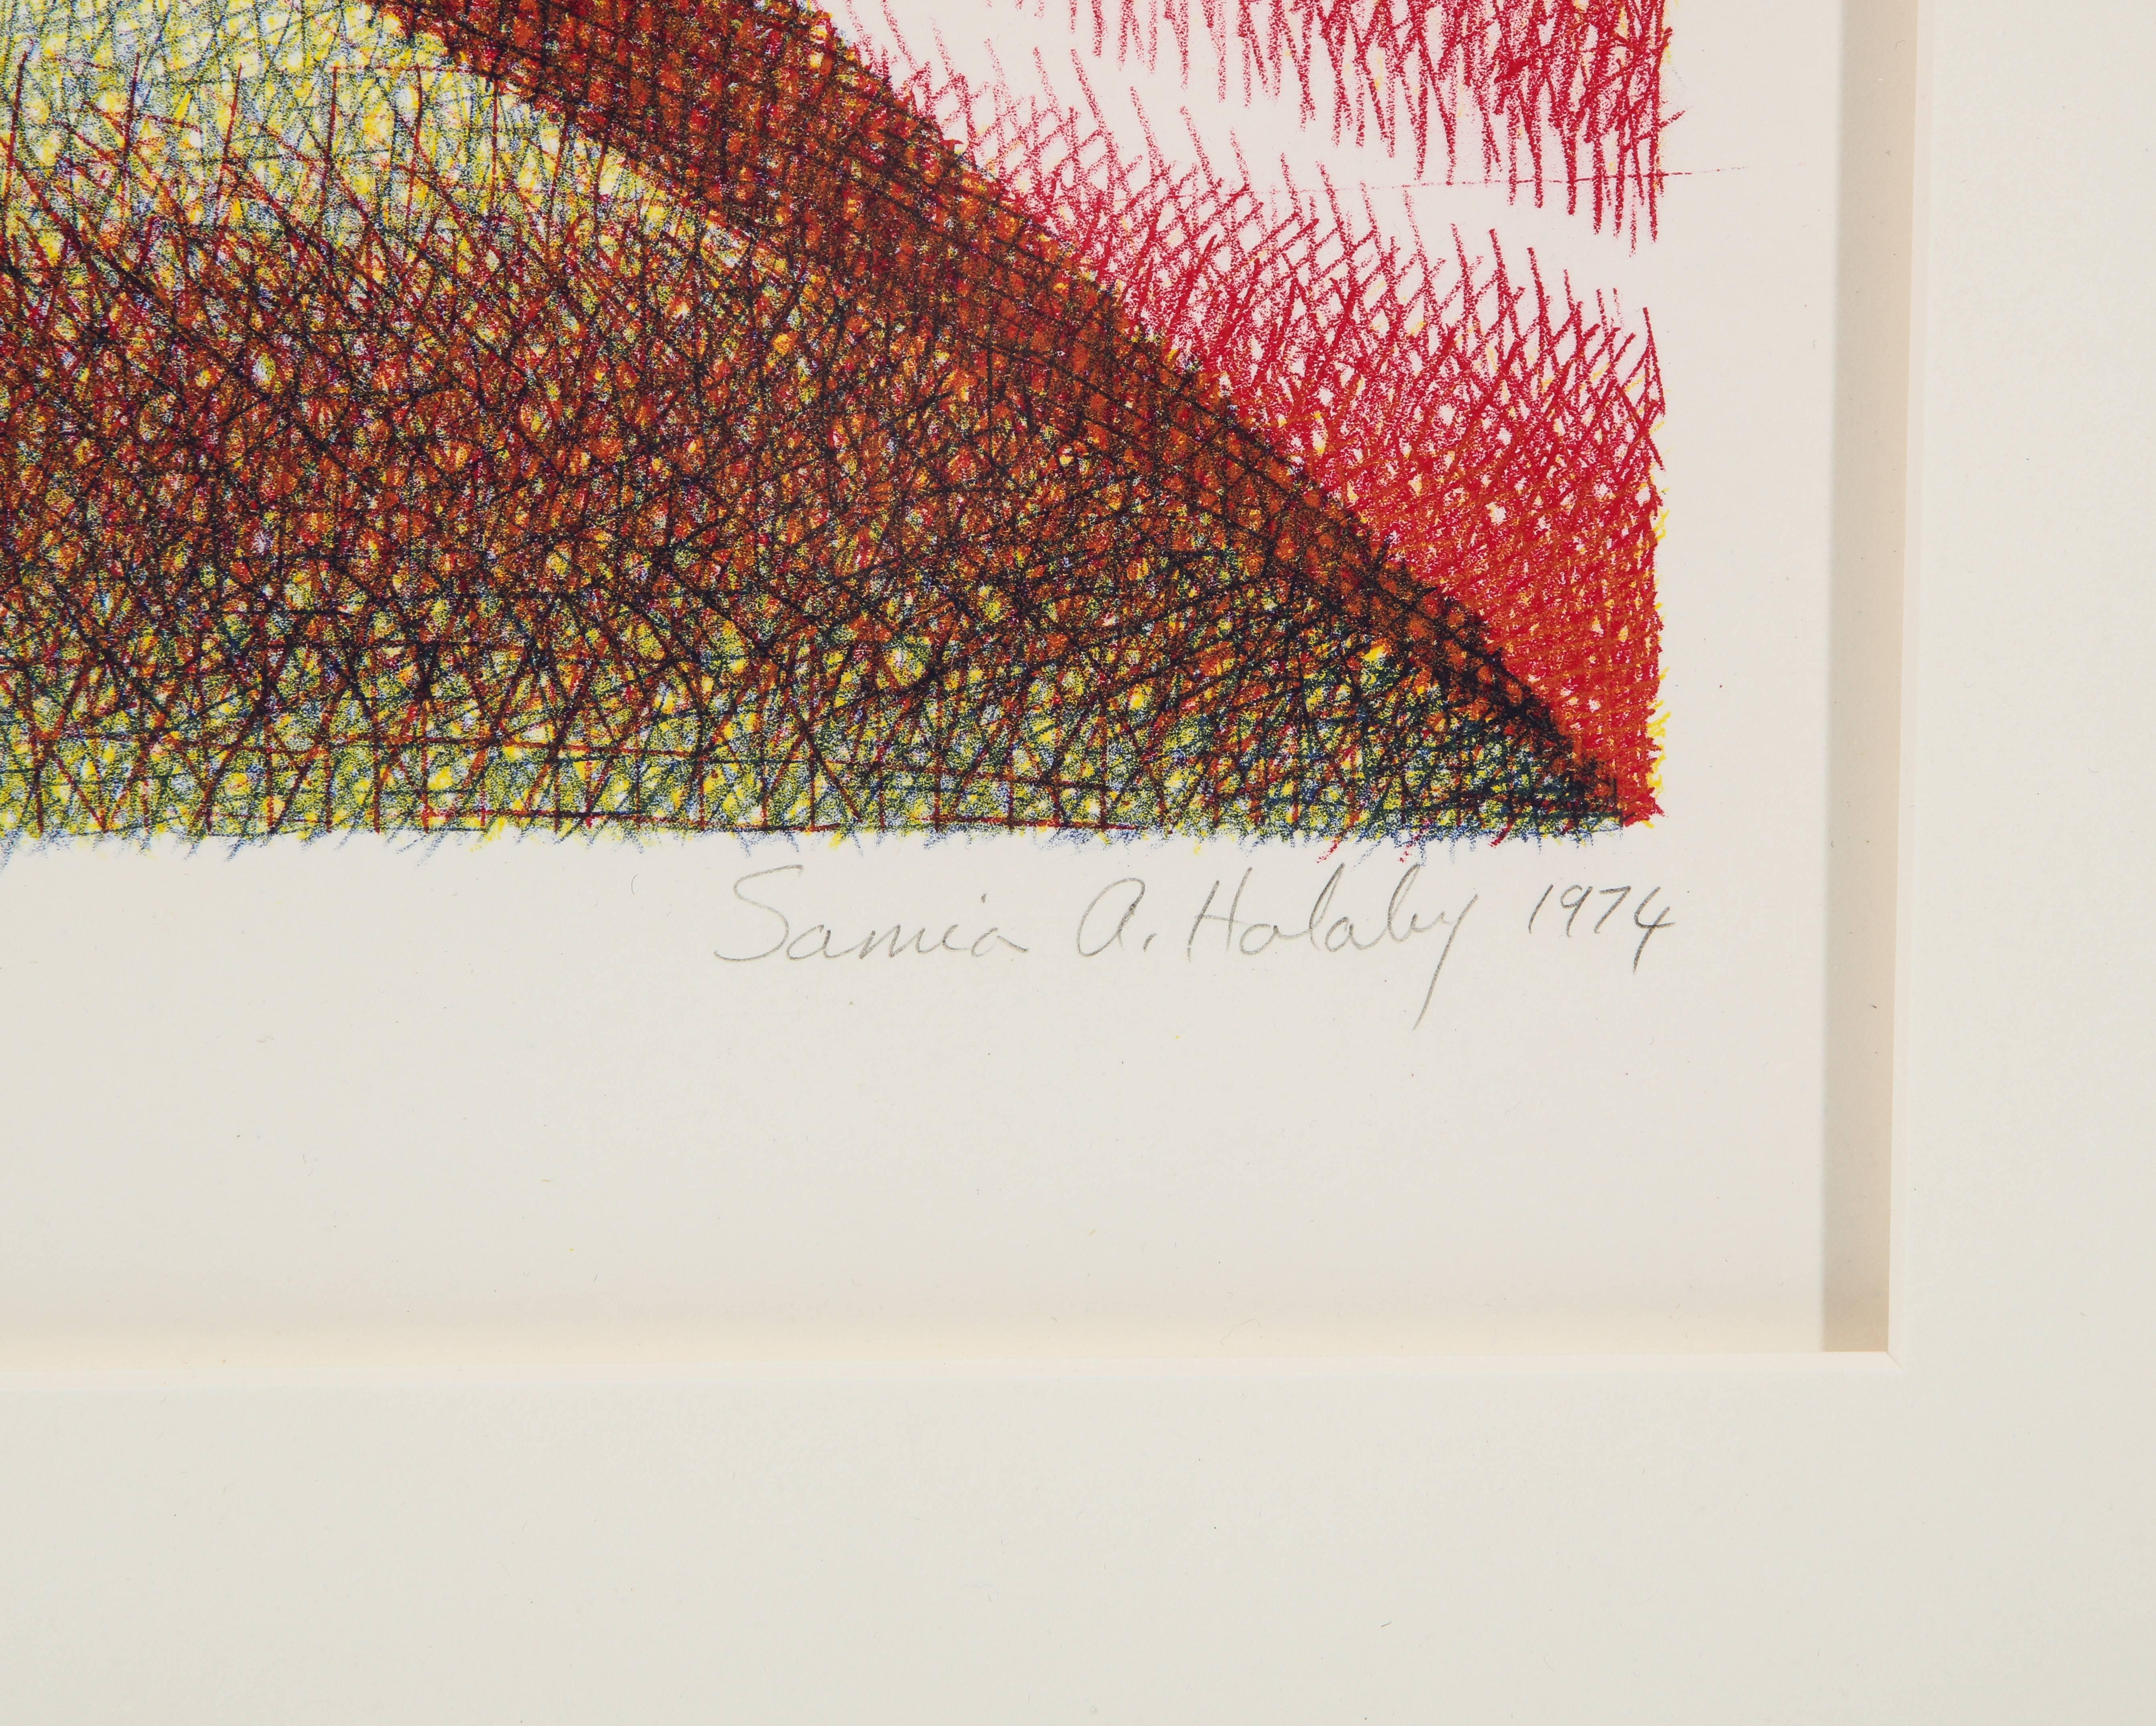 American Samia Halaby Abstract Lithograph, Red, White, Green, Signed